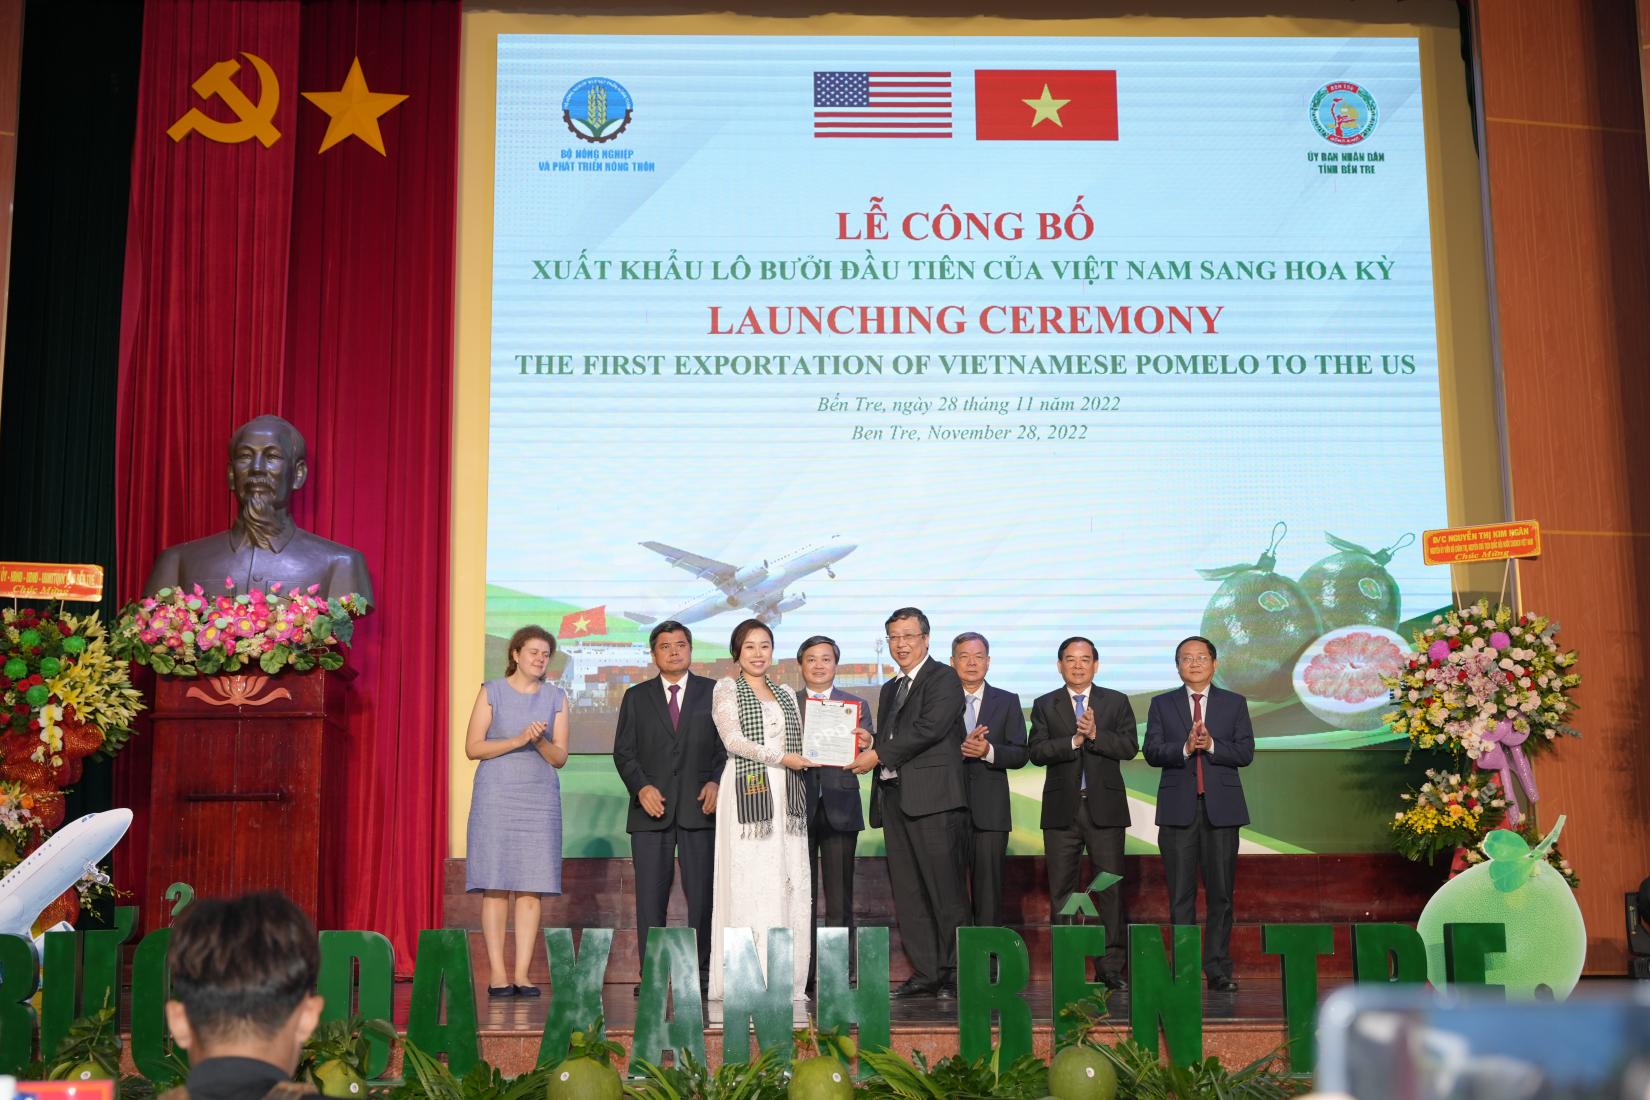 The launching ceremony of first exportation of Vietnamese pomelo to the US